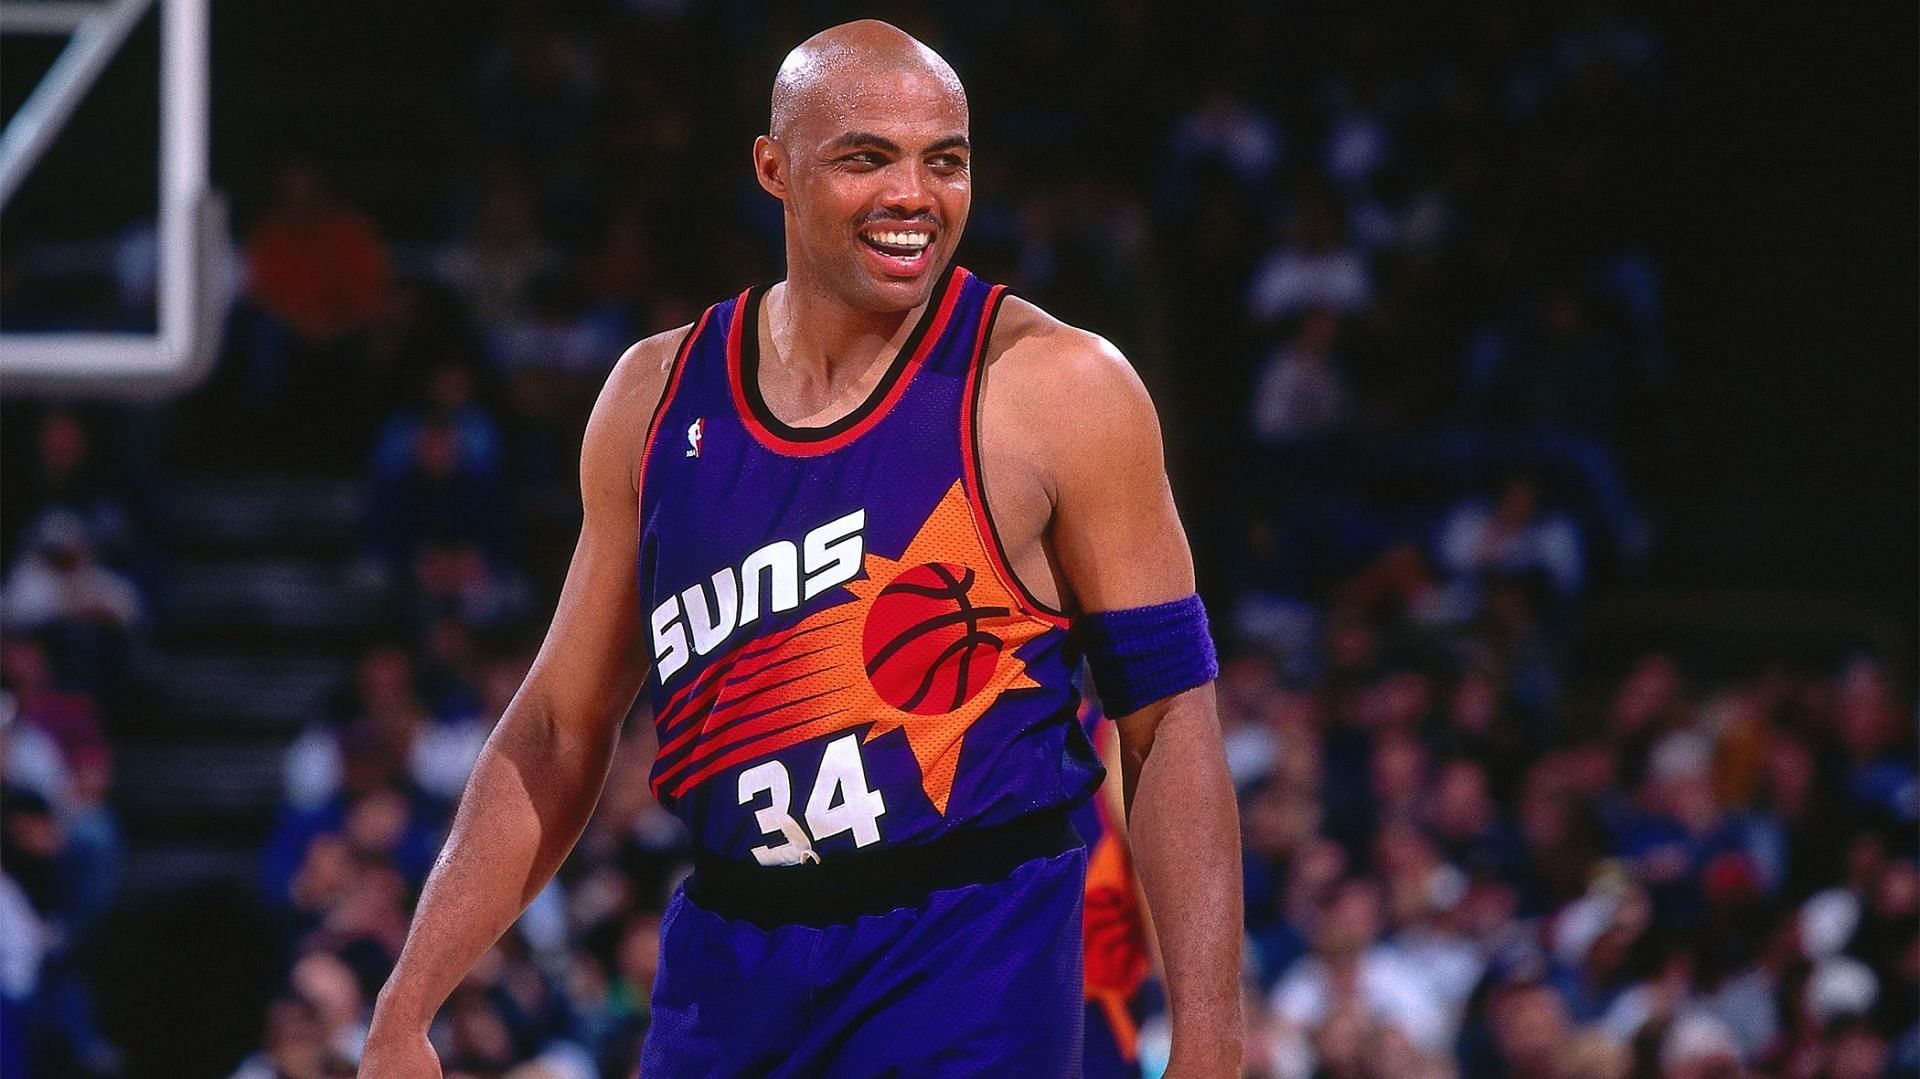 Charles Barkley during his tenure with the Phoenix Suns.